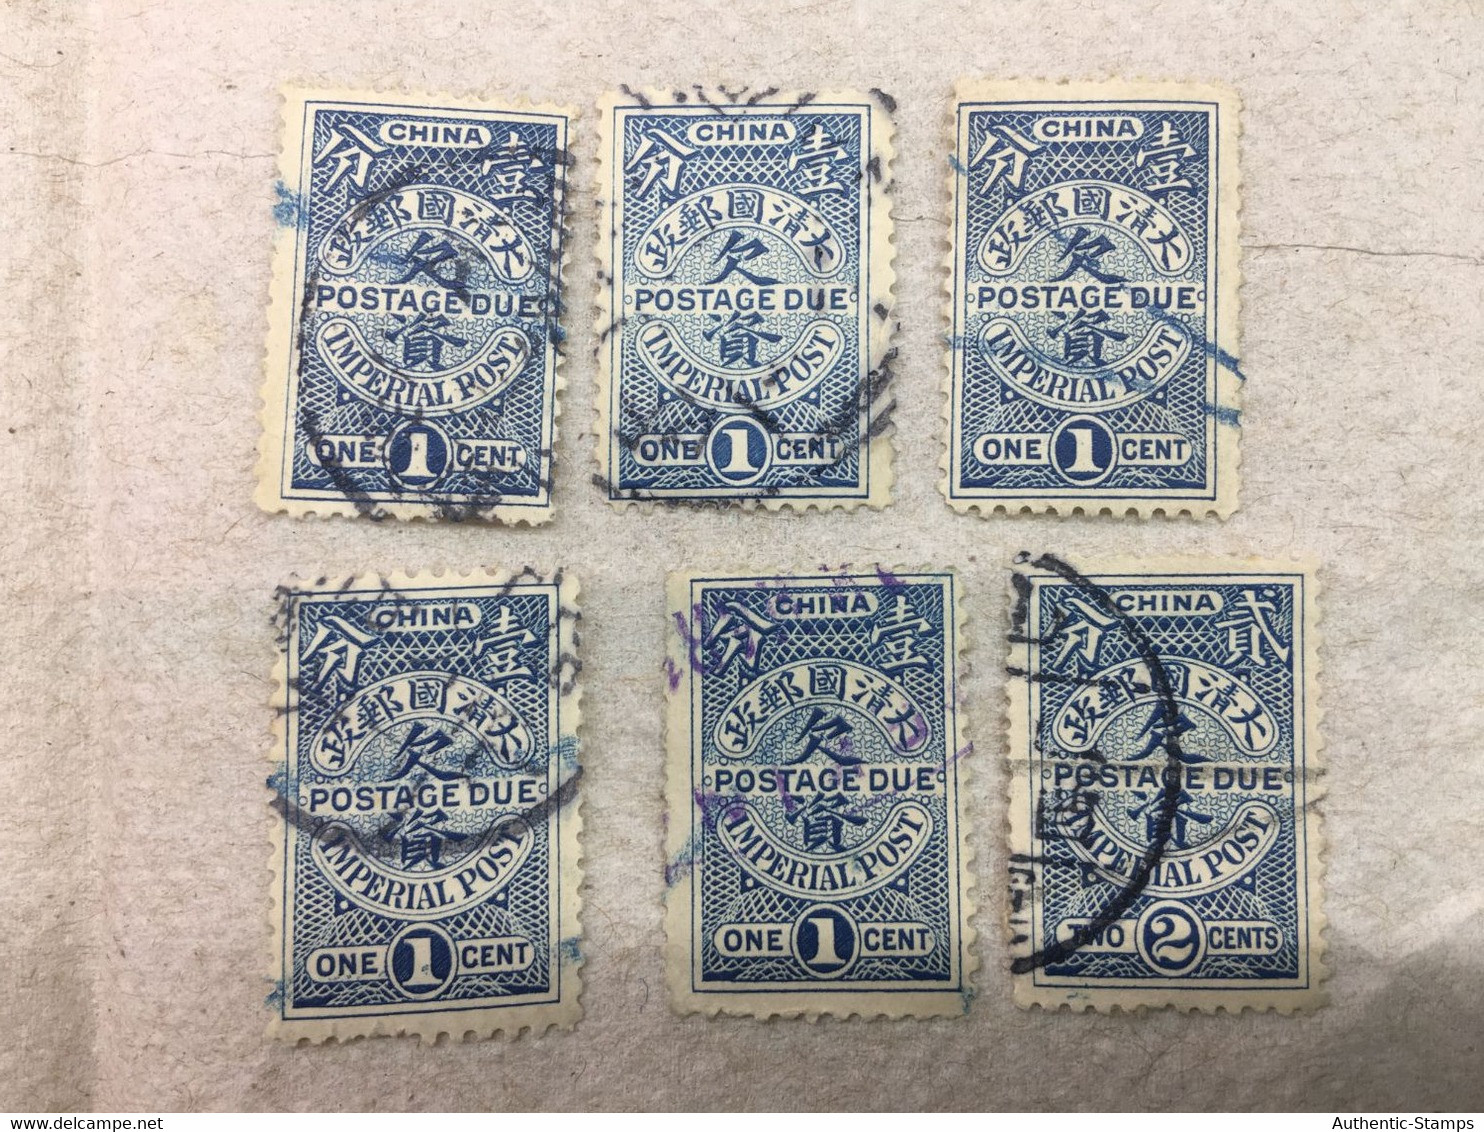 CHINA STAMP, Imperial, USED, TIMBRO, STEMPEL, CINA, CHINE, LIST 5193 - Oblitérés